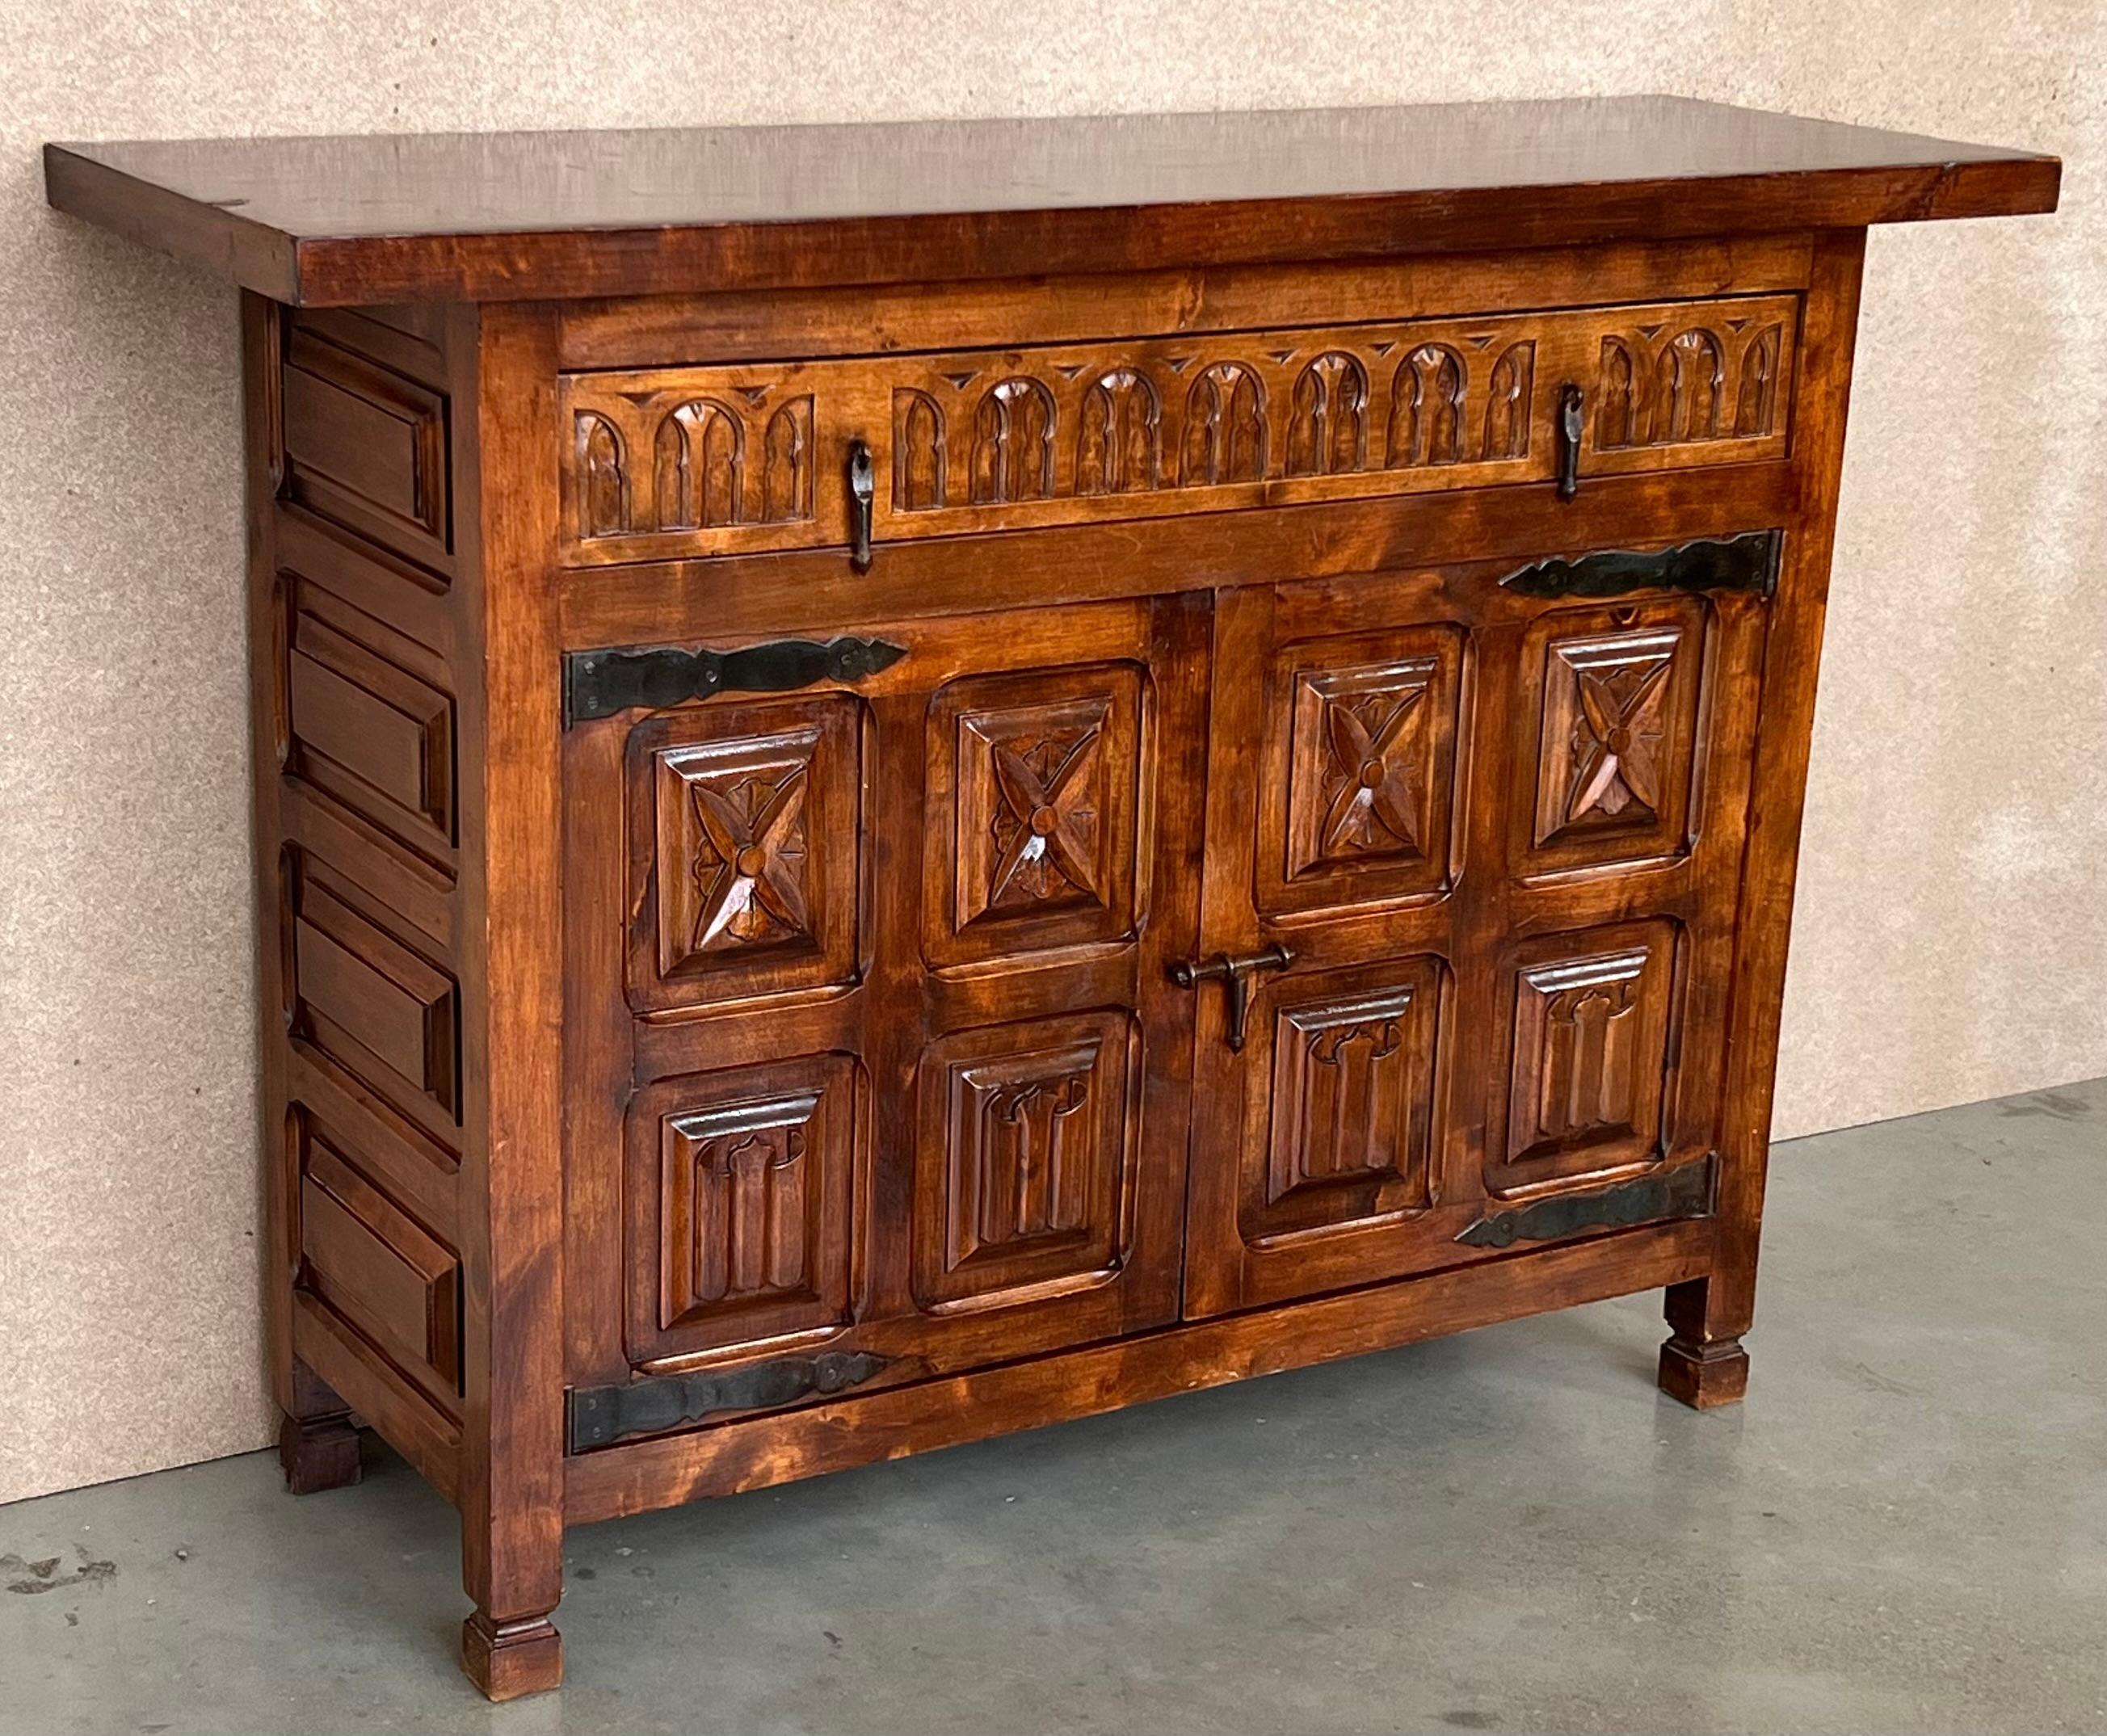 20th Century Spanish Carved Walnut Tuscan Credenza or Buffet with One-Drawer In Good Condition For Sale In Miami, FL